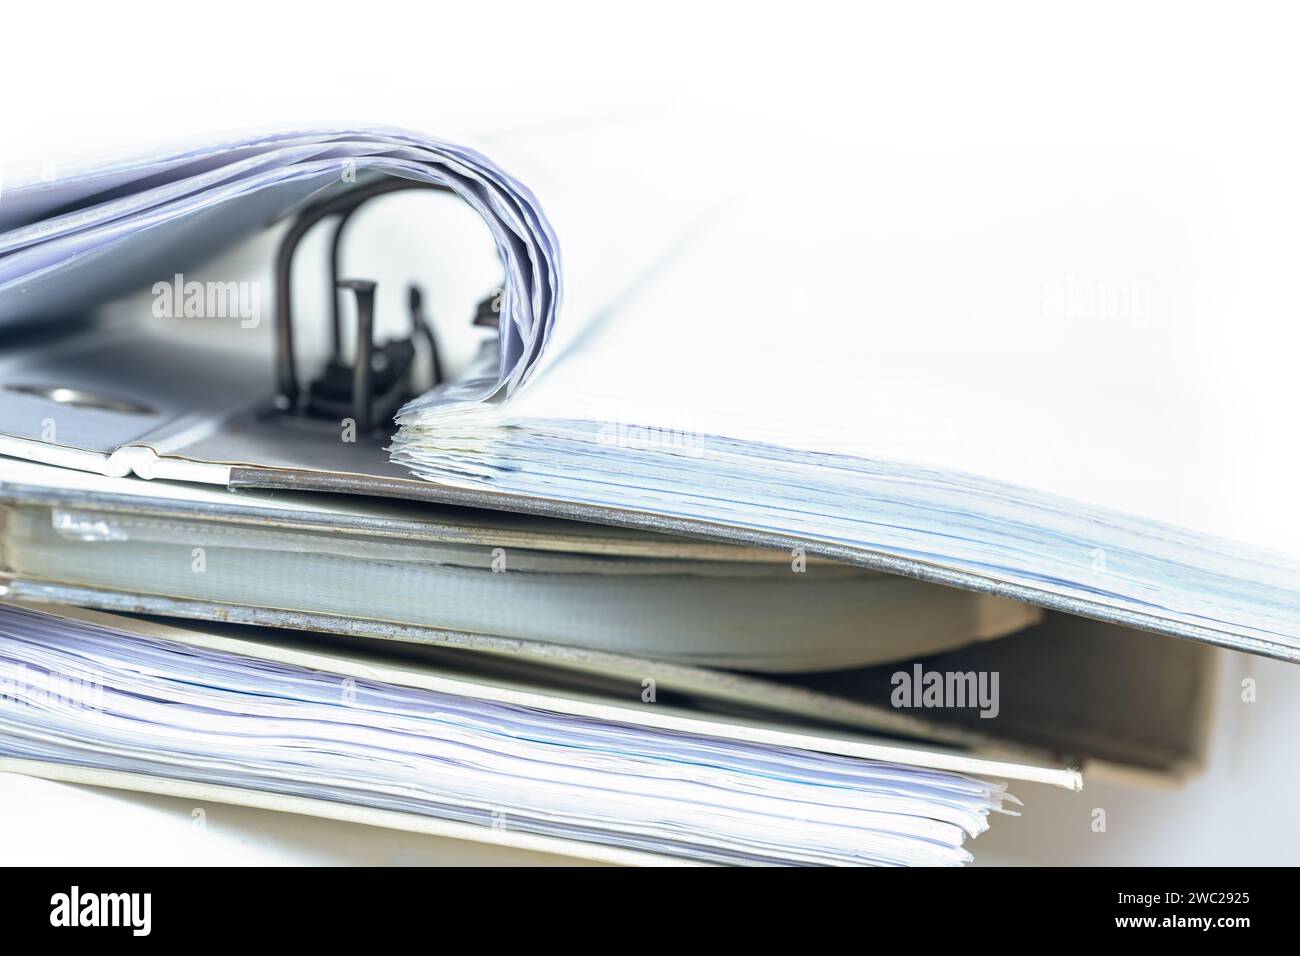 Part of an open ring binder with many documents on a stack of more file folders, business and office concept fading to a white background, copy space, Stock Photo